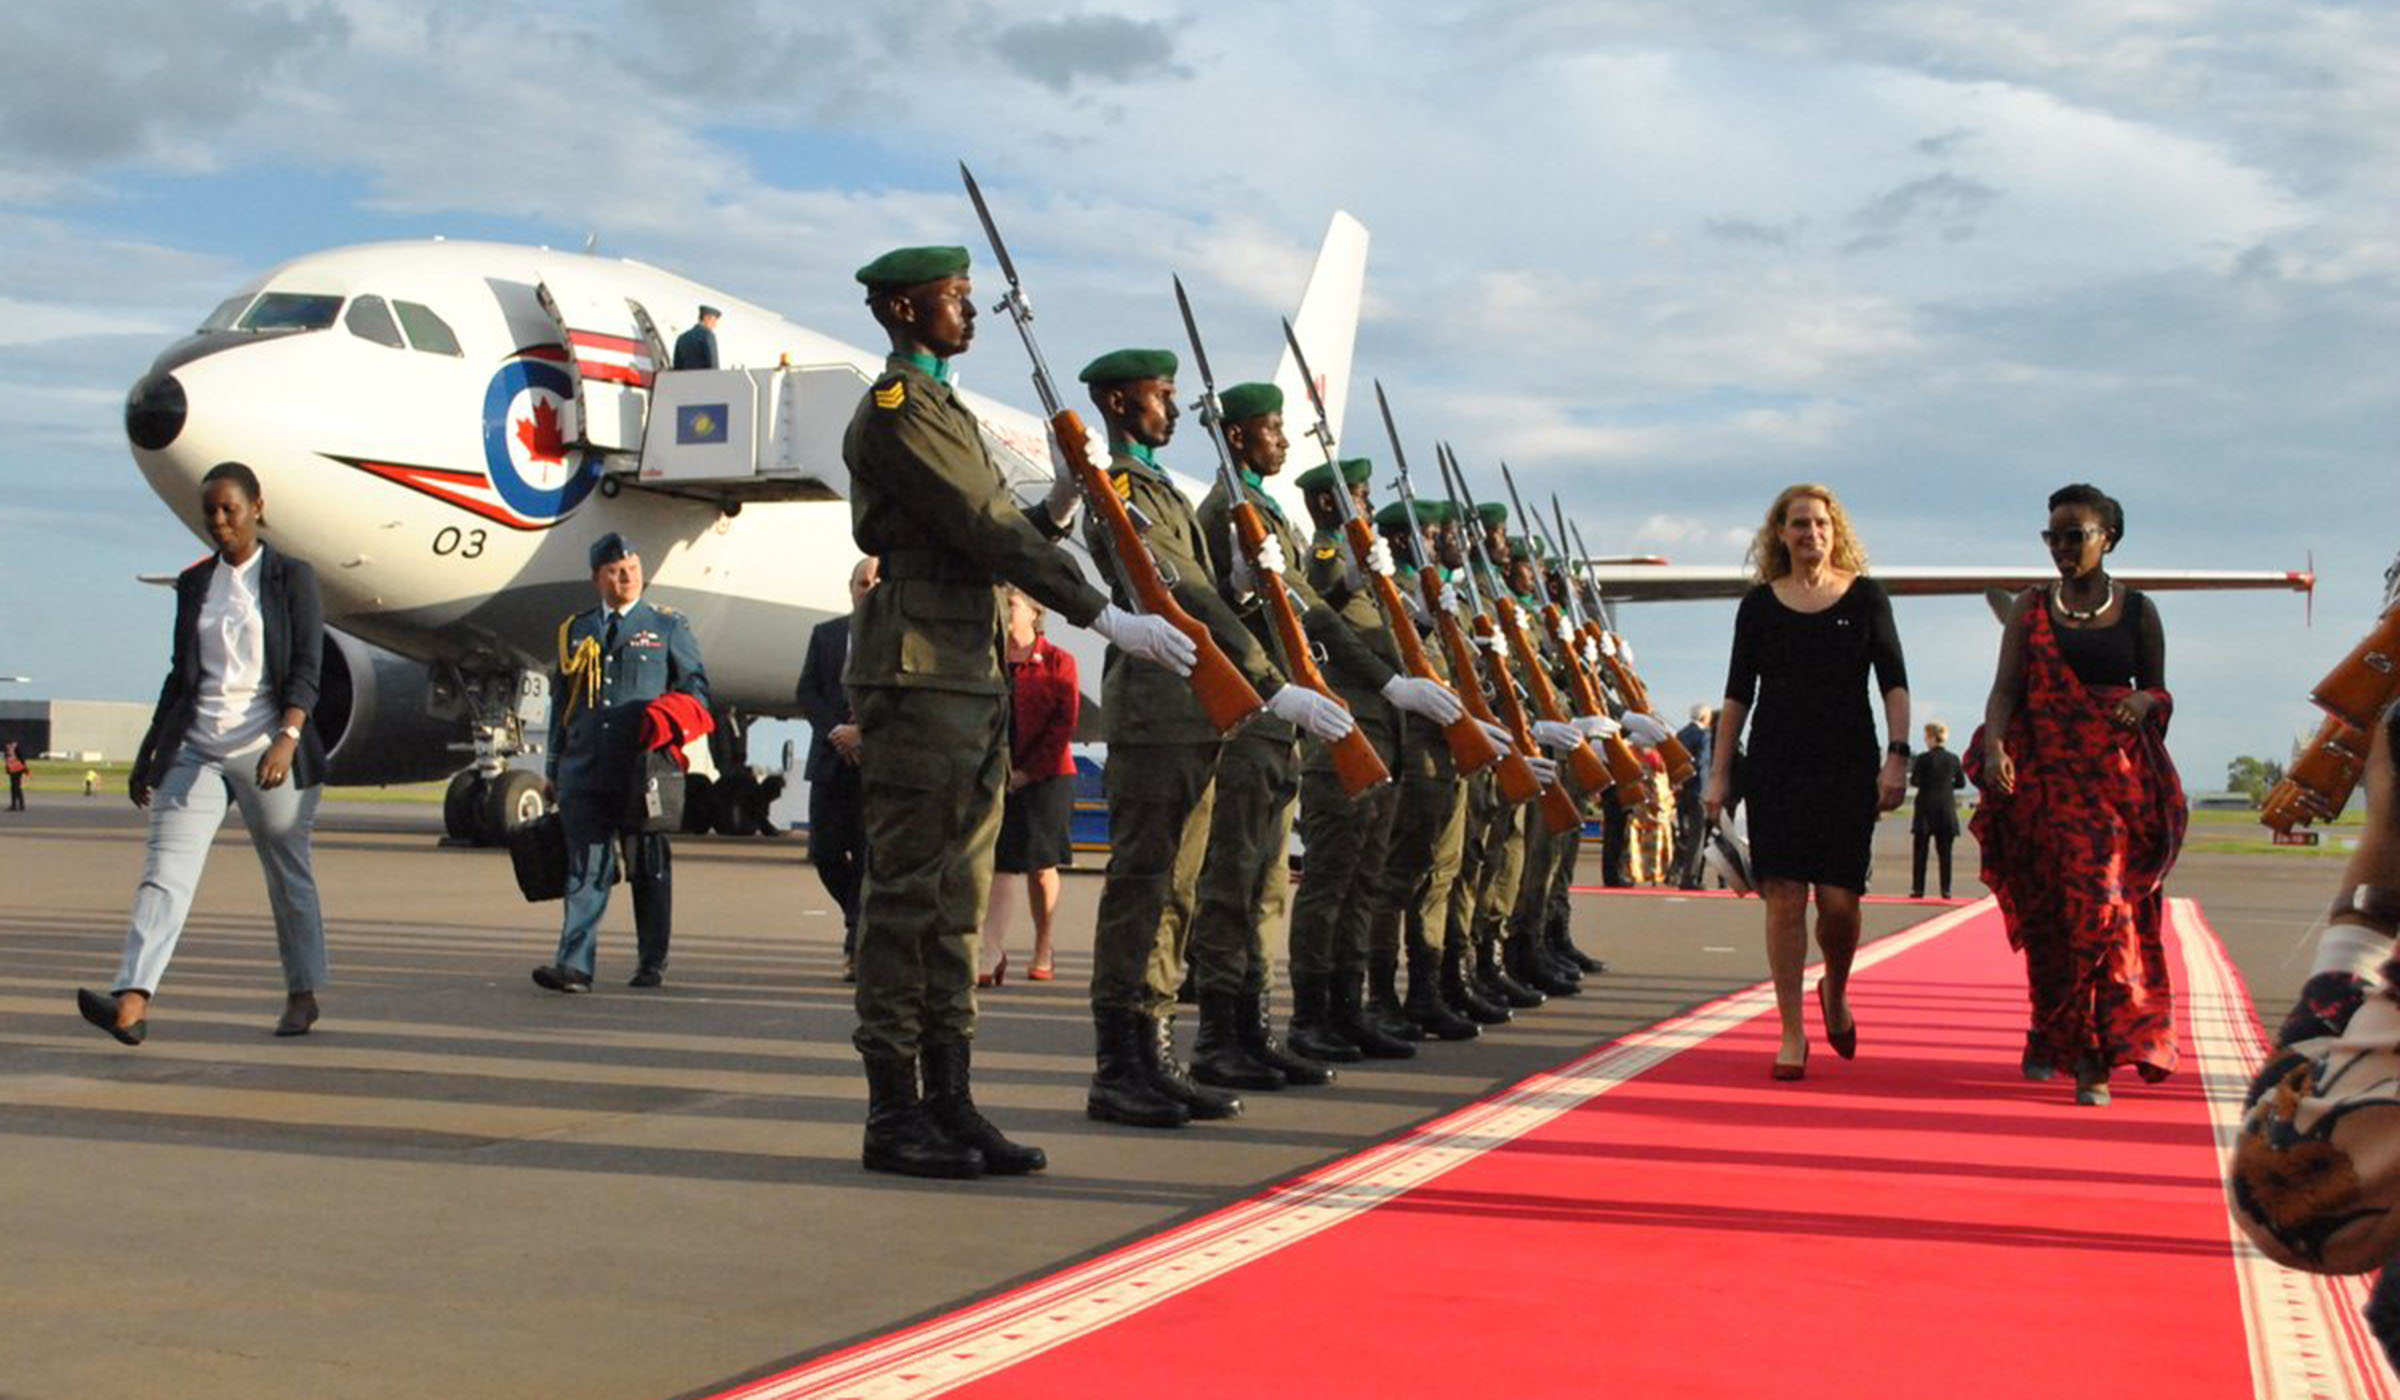 Canadian Governor General Julie Payette is received by Rwandau2019s Minister for ICT & Innovation Paula Ingabire at Kigali International Airport. Courtesy.